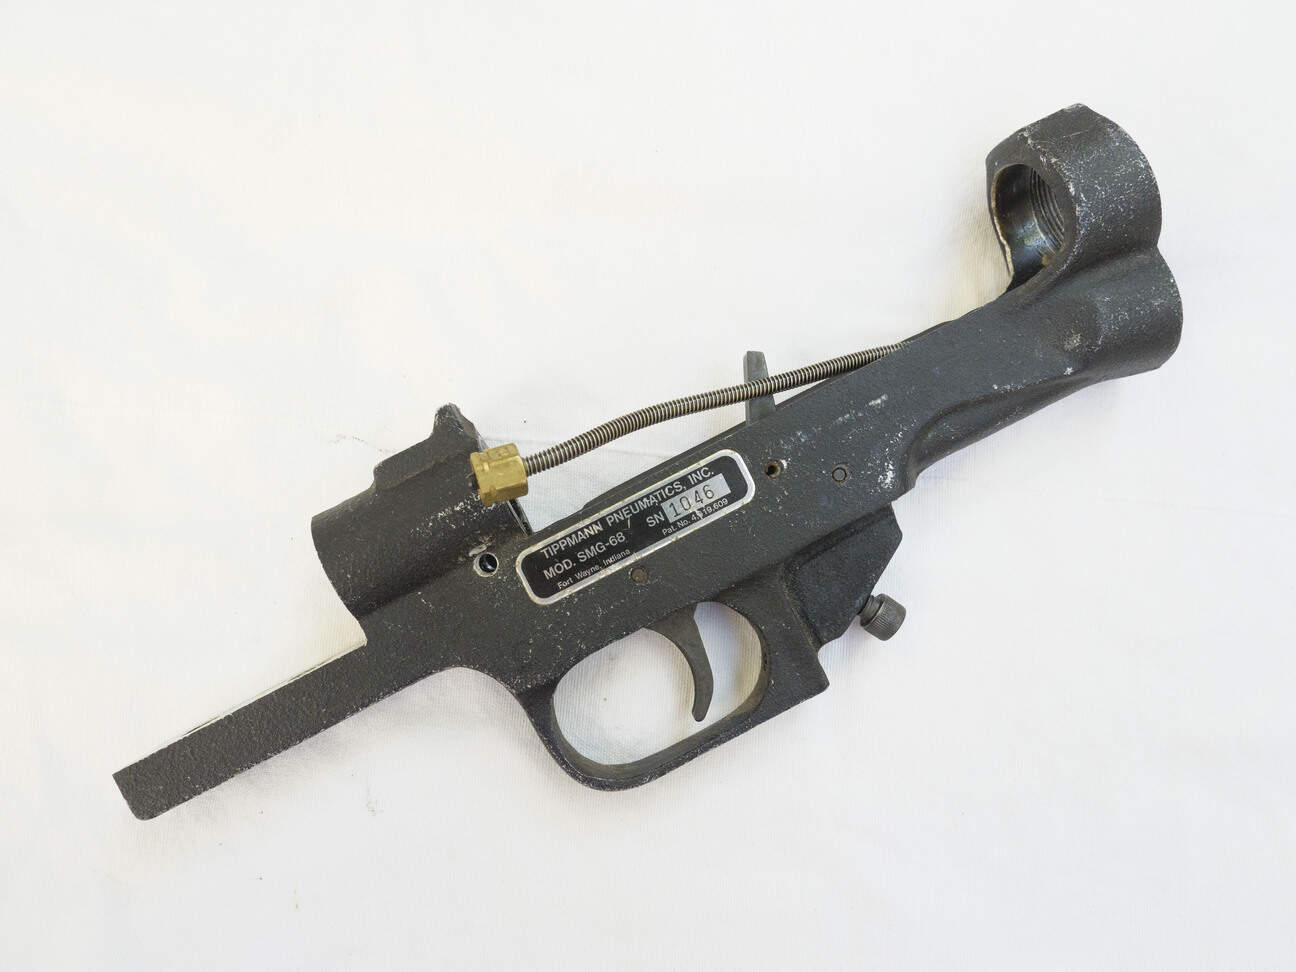 Tippmann 68 special receiver, converted from an SMG 68